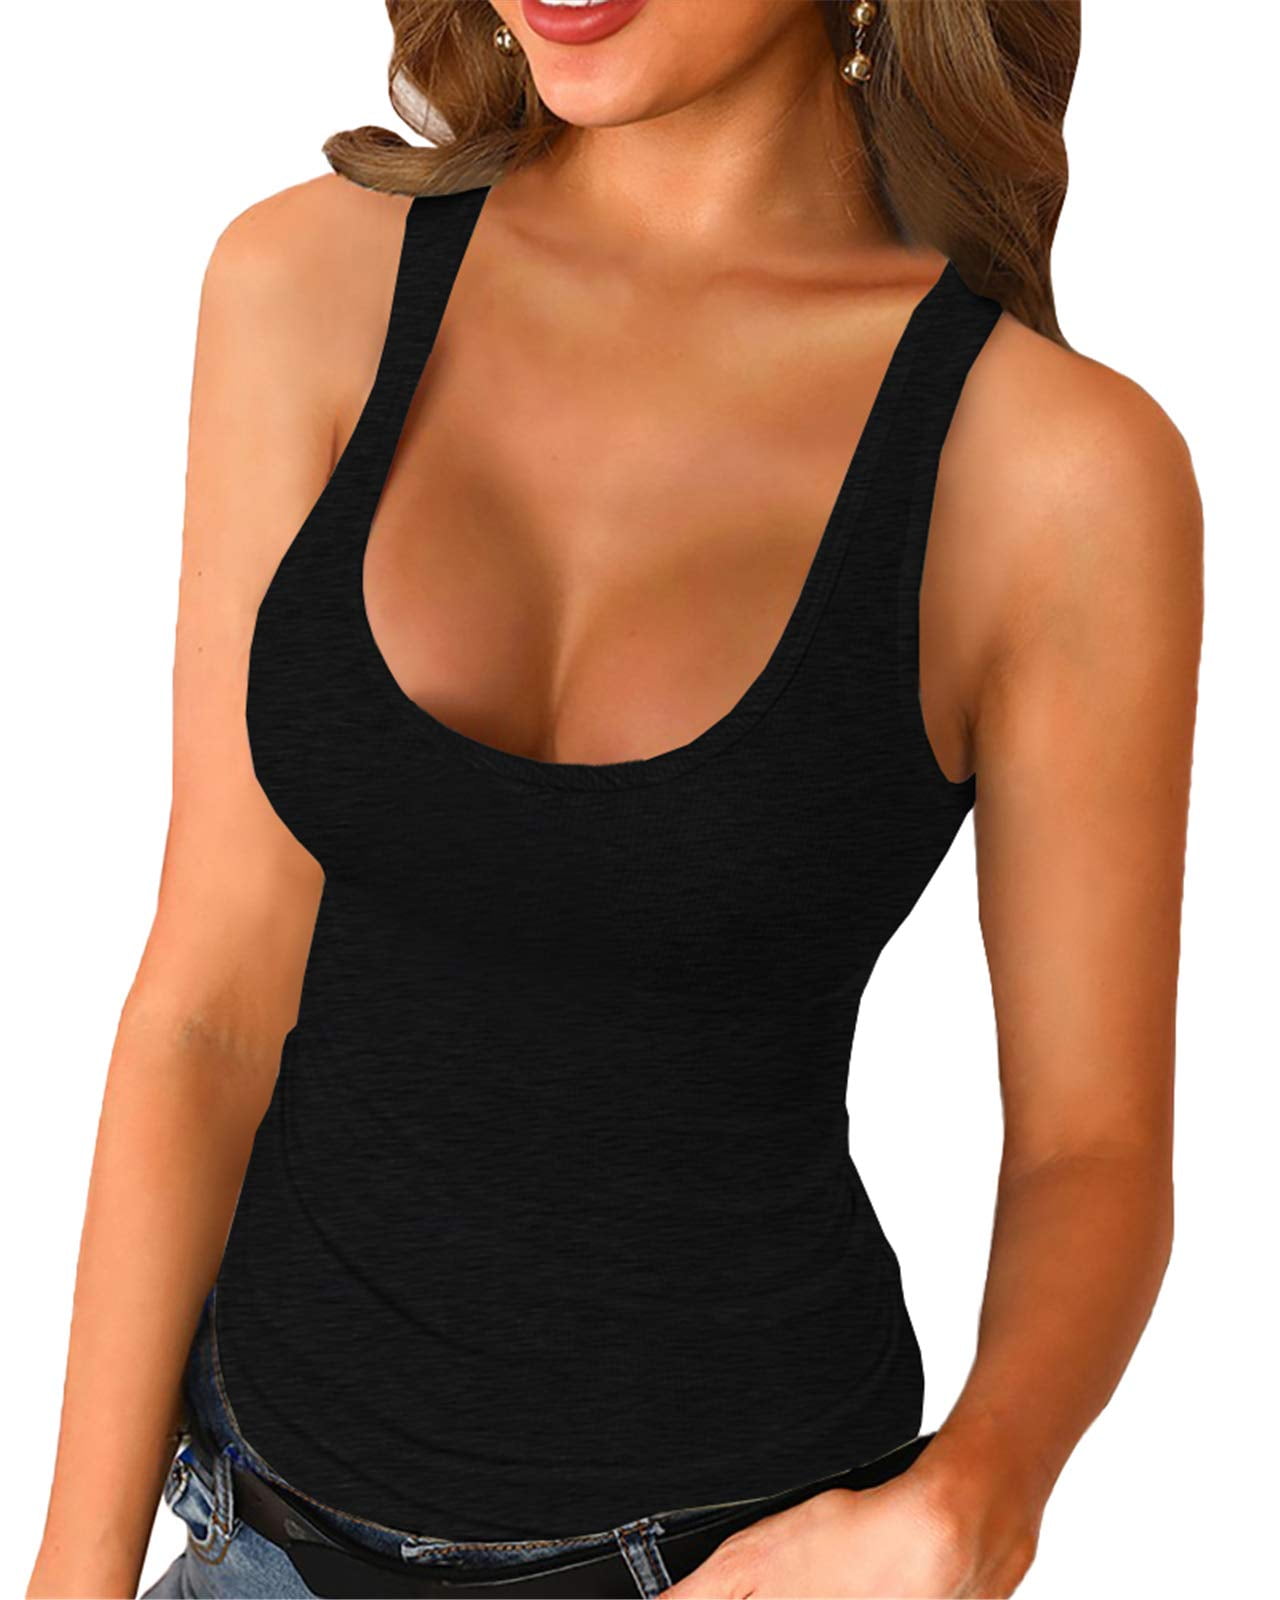 Women Summer Sleeveless Tops Workout Tank Tops For Women T Back Tank Tops  For Women Tank Tops For Women Casual Summer 15 And Under Items Prime Items  Under 1 Dollar Wearhouse.Deals Clearance